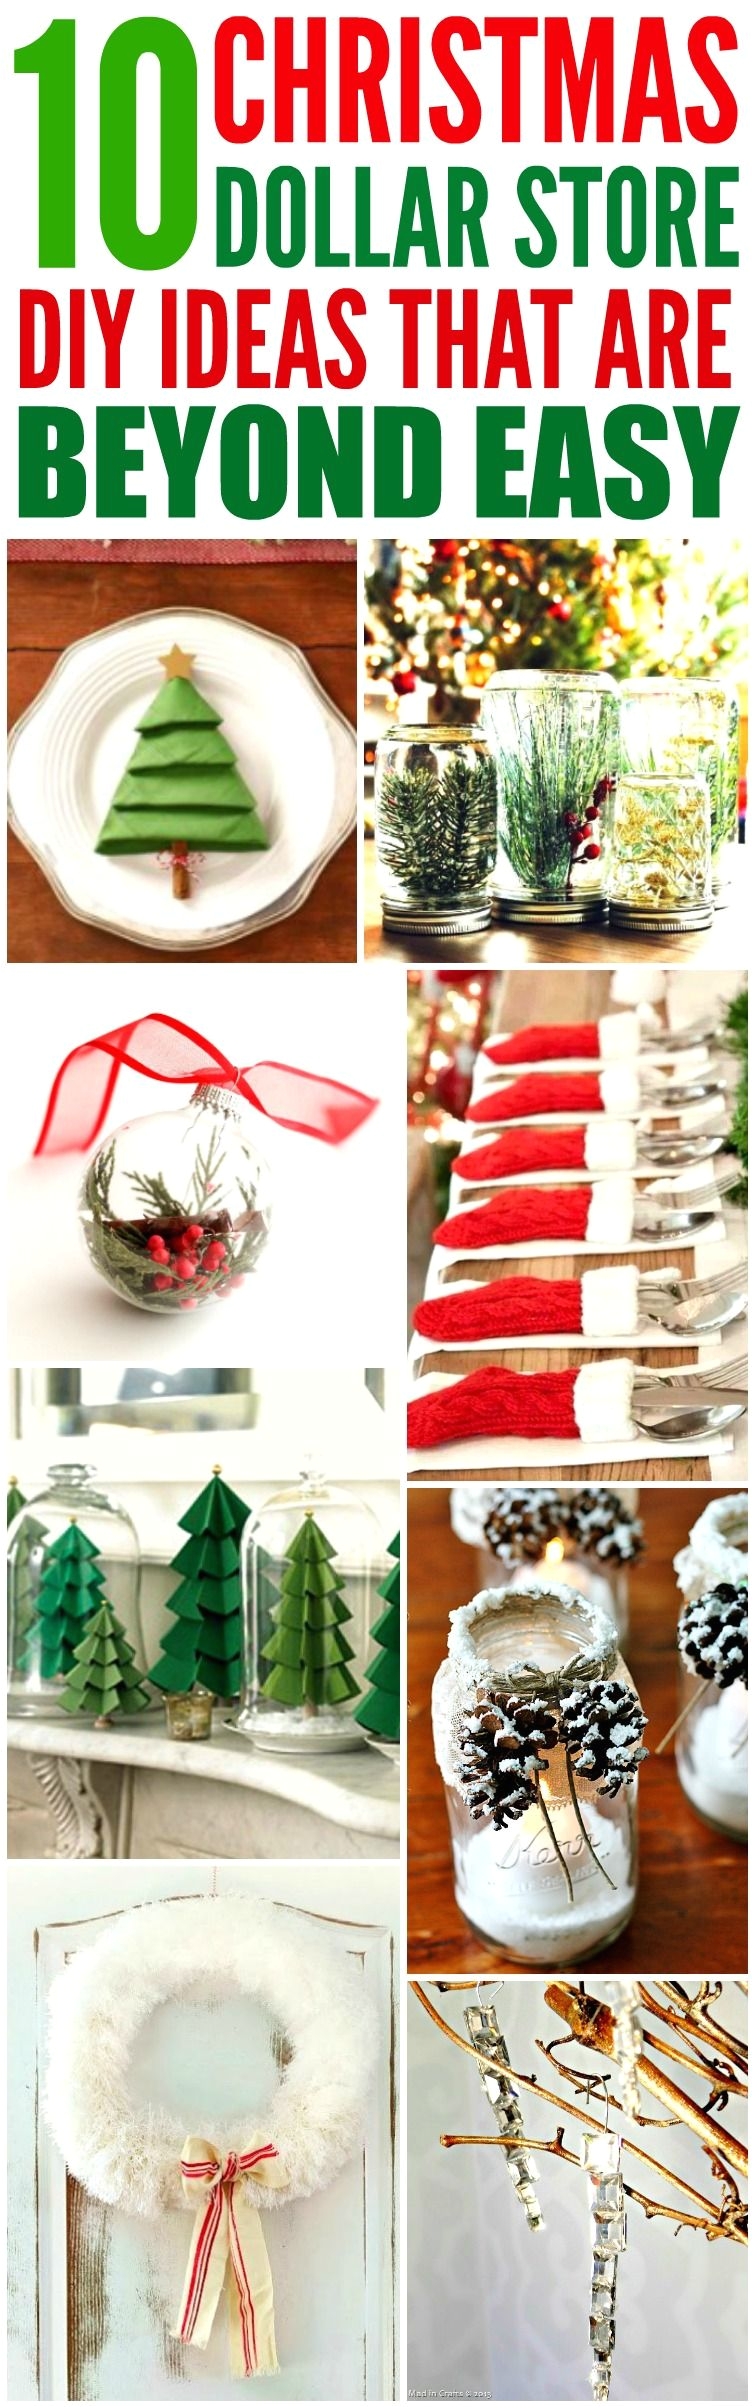 these 10 dollar store christmas decor ideas are the best i m so happy i found these great ideas now i have some cute and affordable ways to decorate my